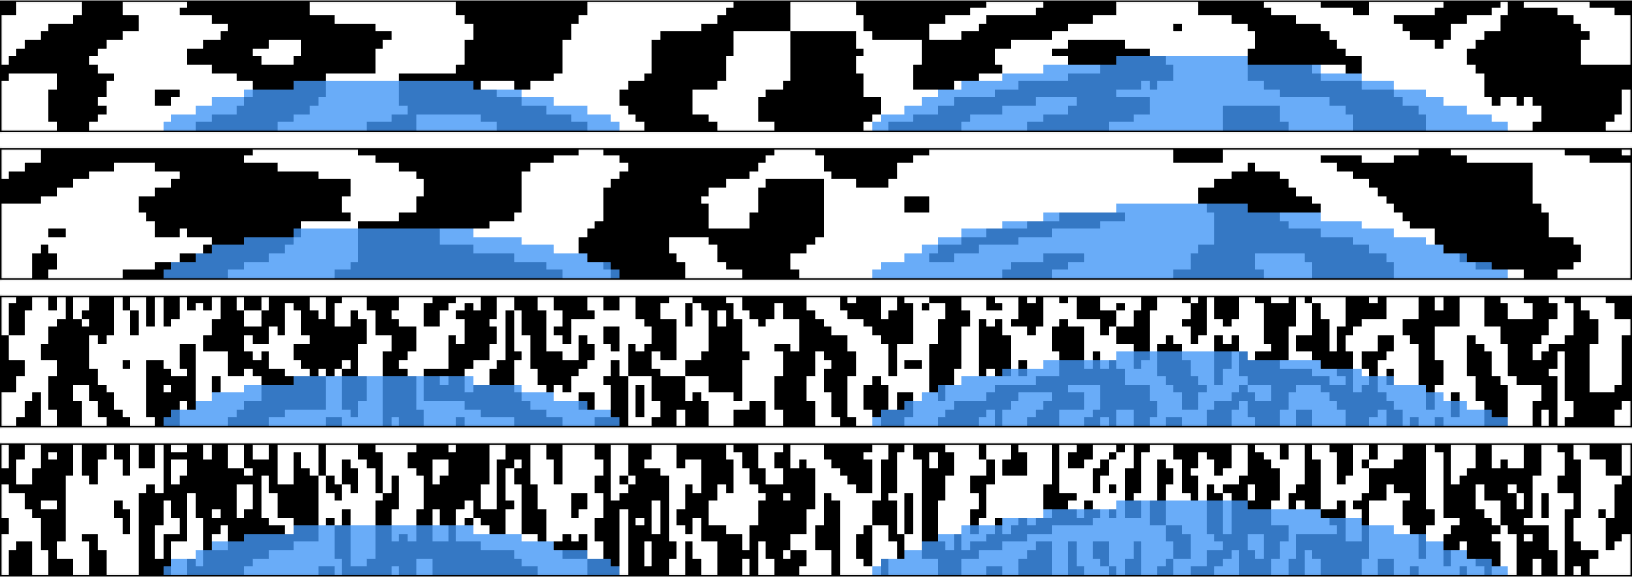 Figure 28: Final iris code. This is the anonymized iris texture expressing one's uniqueness.